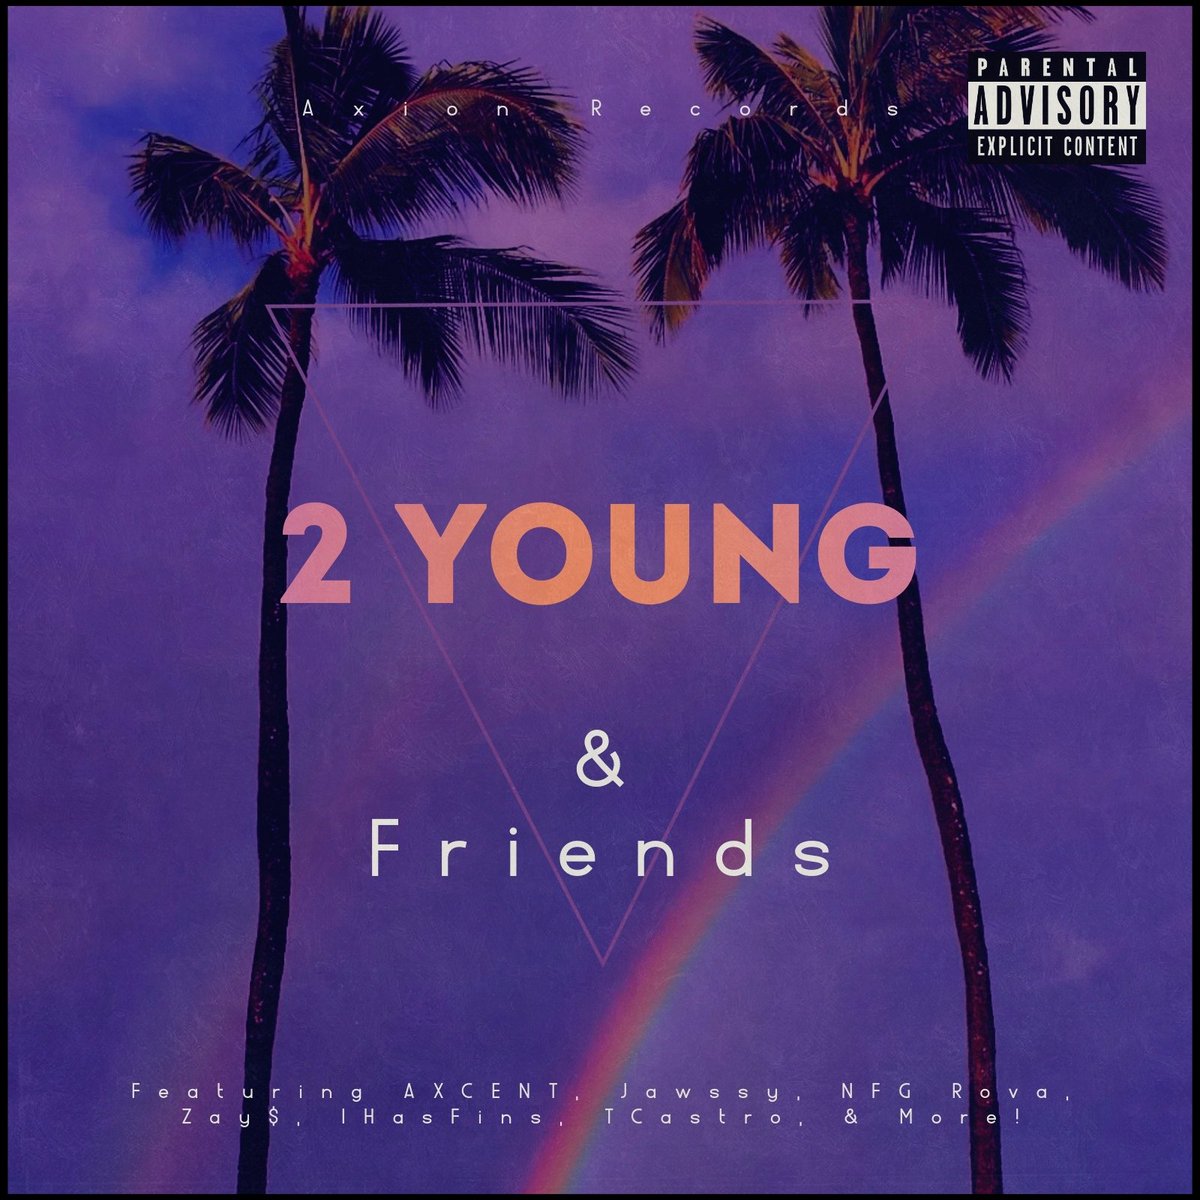 2 Young & Friends releasing Janurary 22nd, 2023! Be ready! #rap #song #music #newsong #newrelease #upandcomingartist #upandcomingrapper #upcoming #2young #viral #broke #coverart #eminem #fyp #gostreamitimbroke #hiphop #instrumental #kid #promote #whiteboy #young #notfamousyet